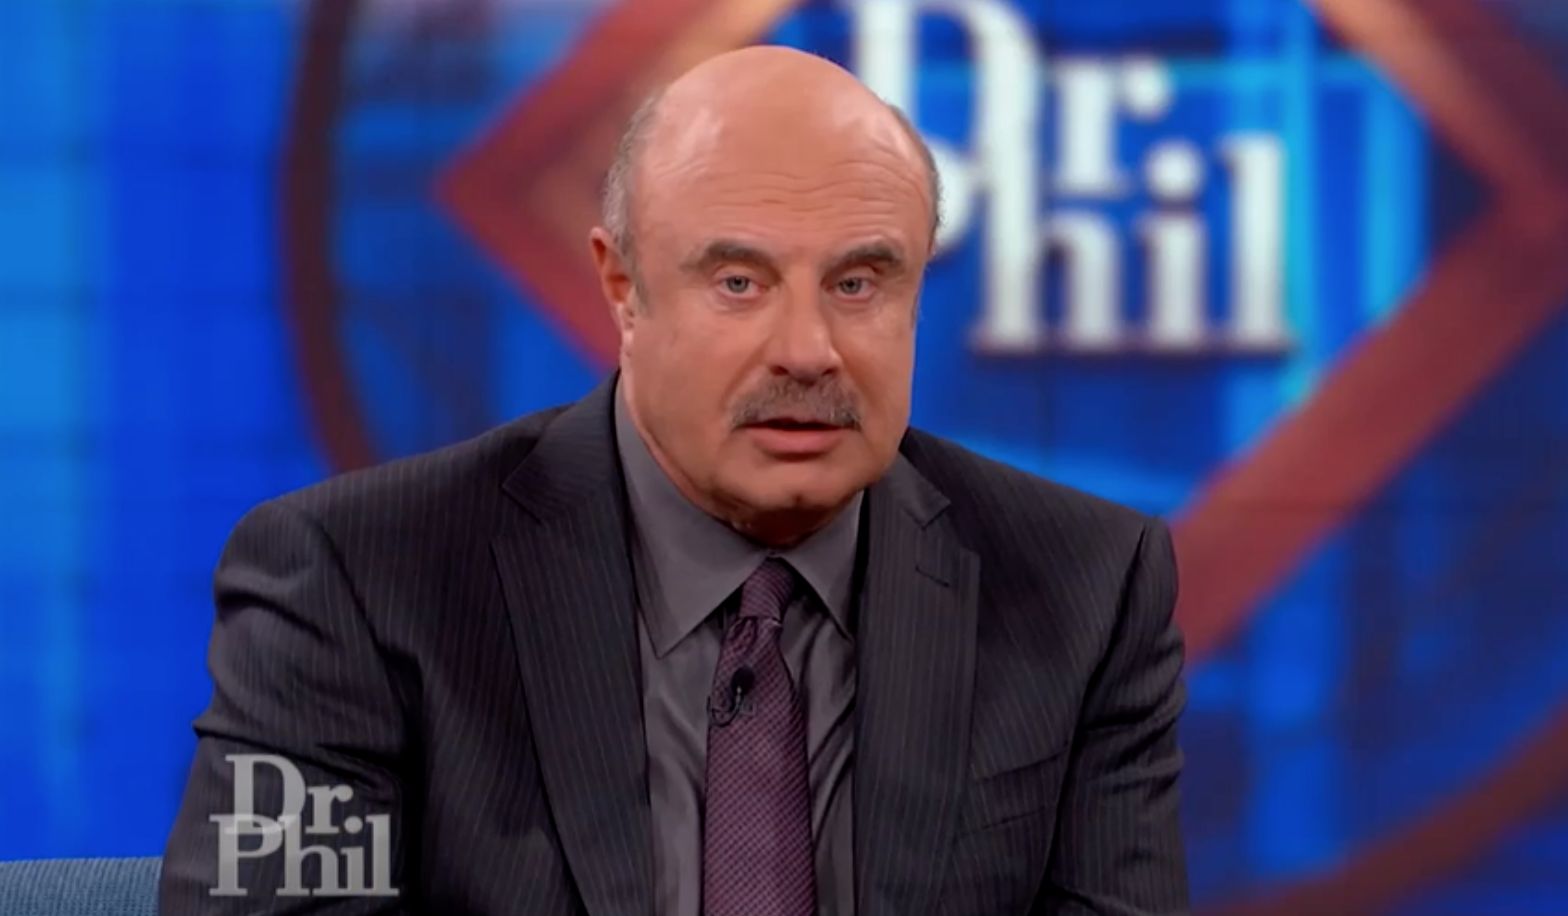 Dr phil girl thinks eminem is her father